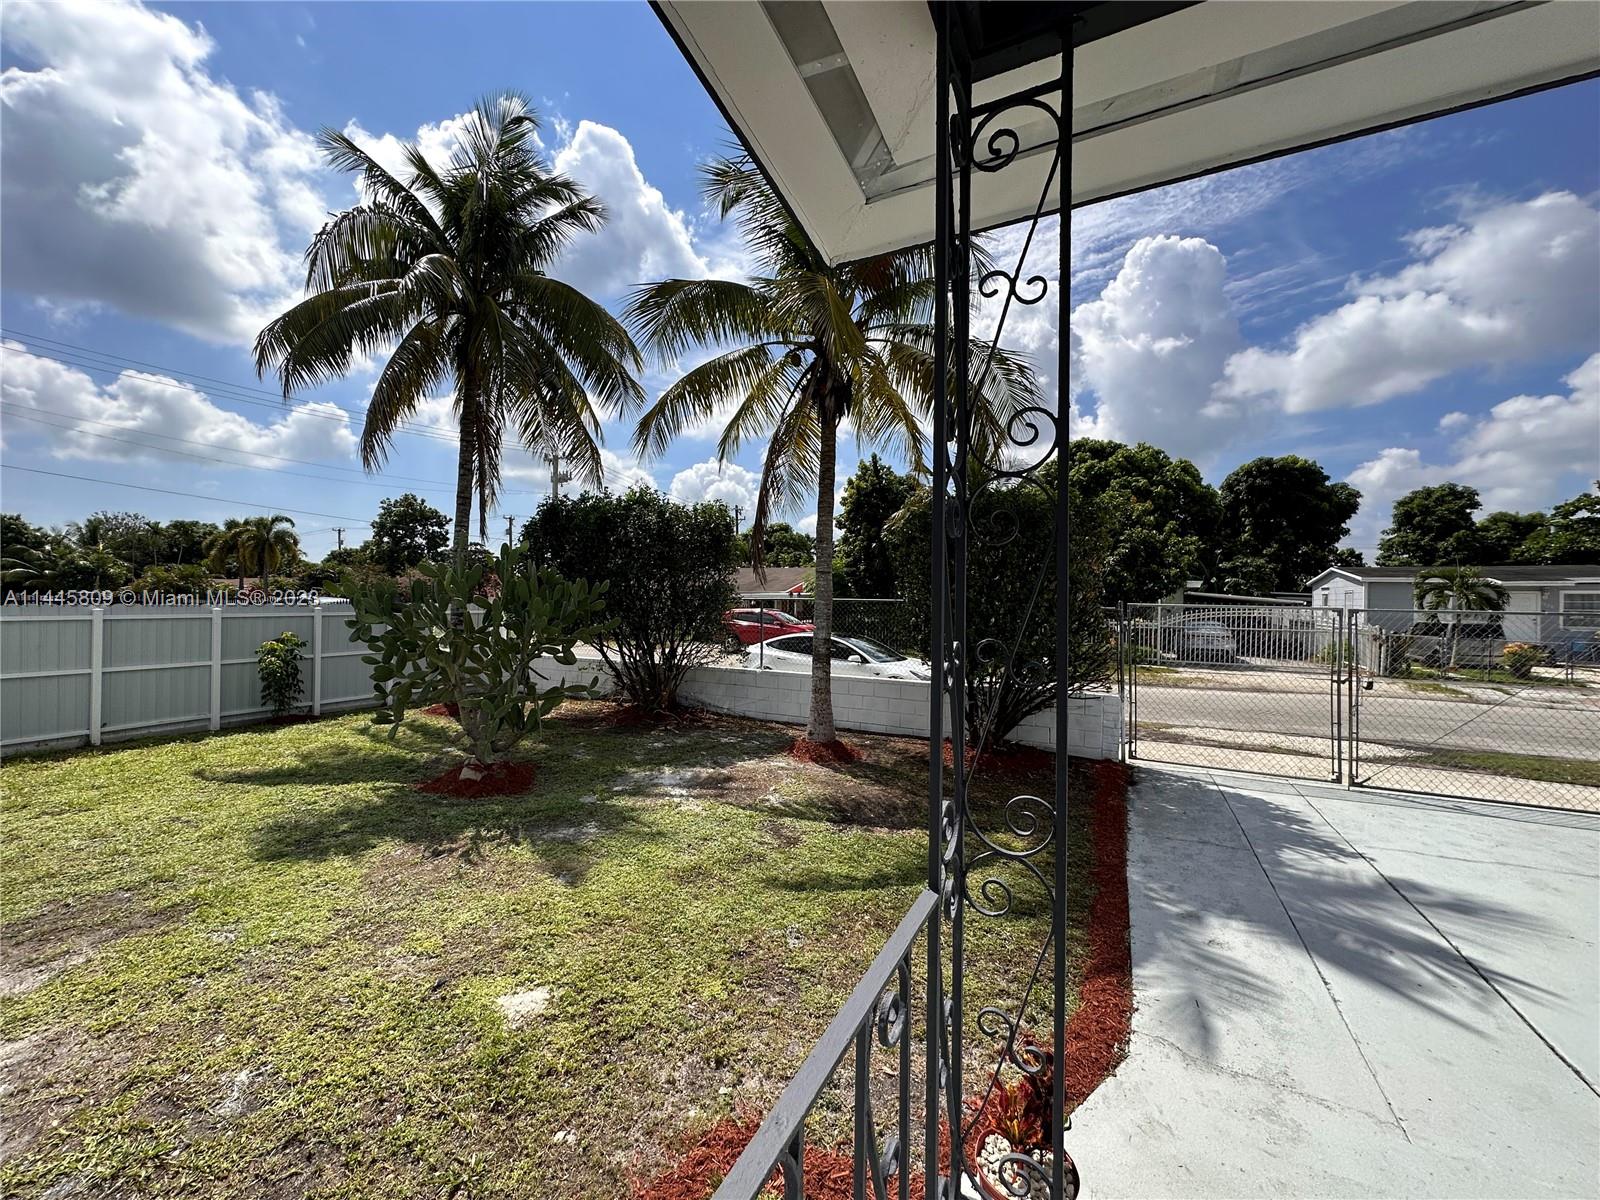 Photo 3 of 1411 NW 118th St in Miami - MLS A11445809